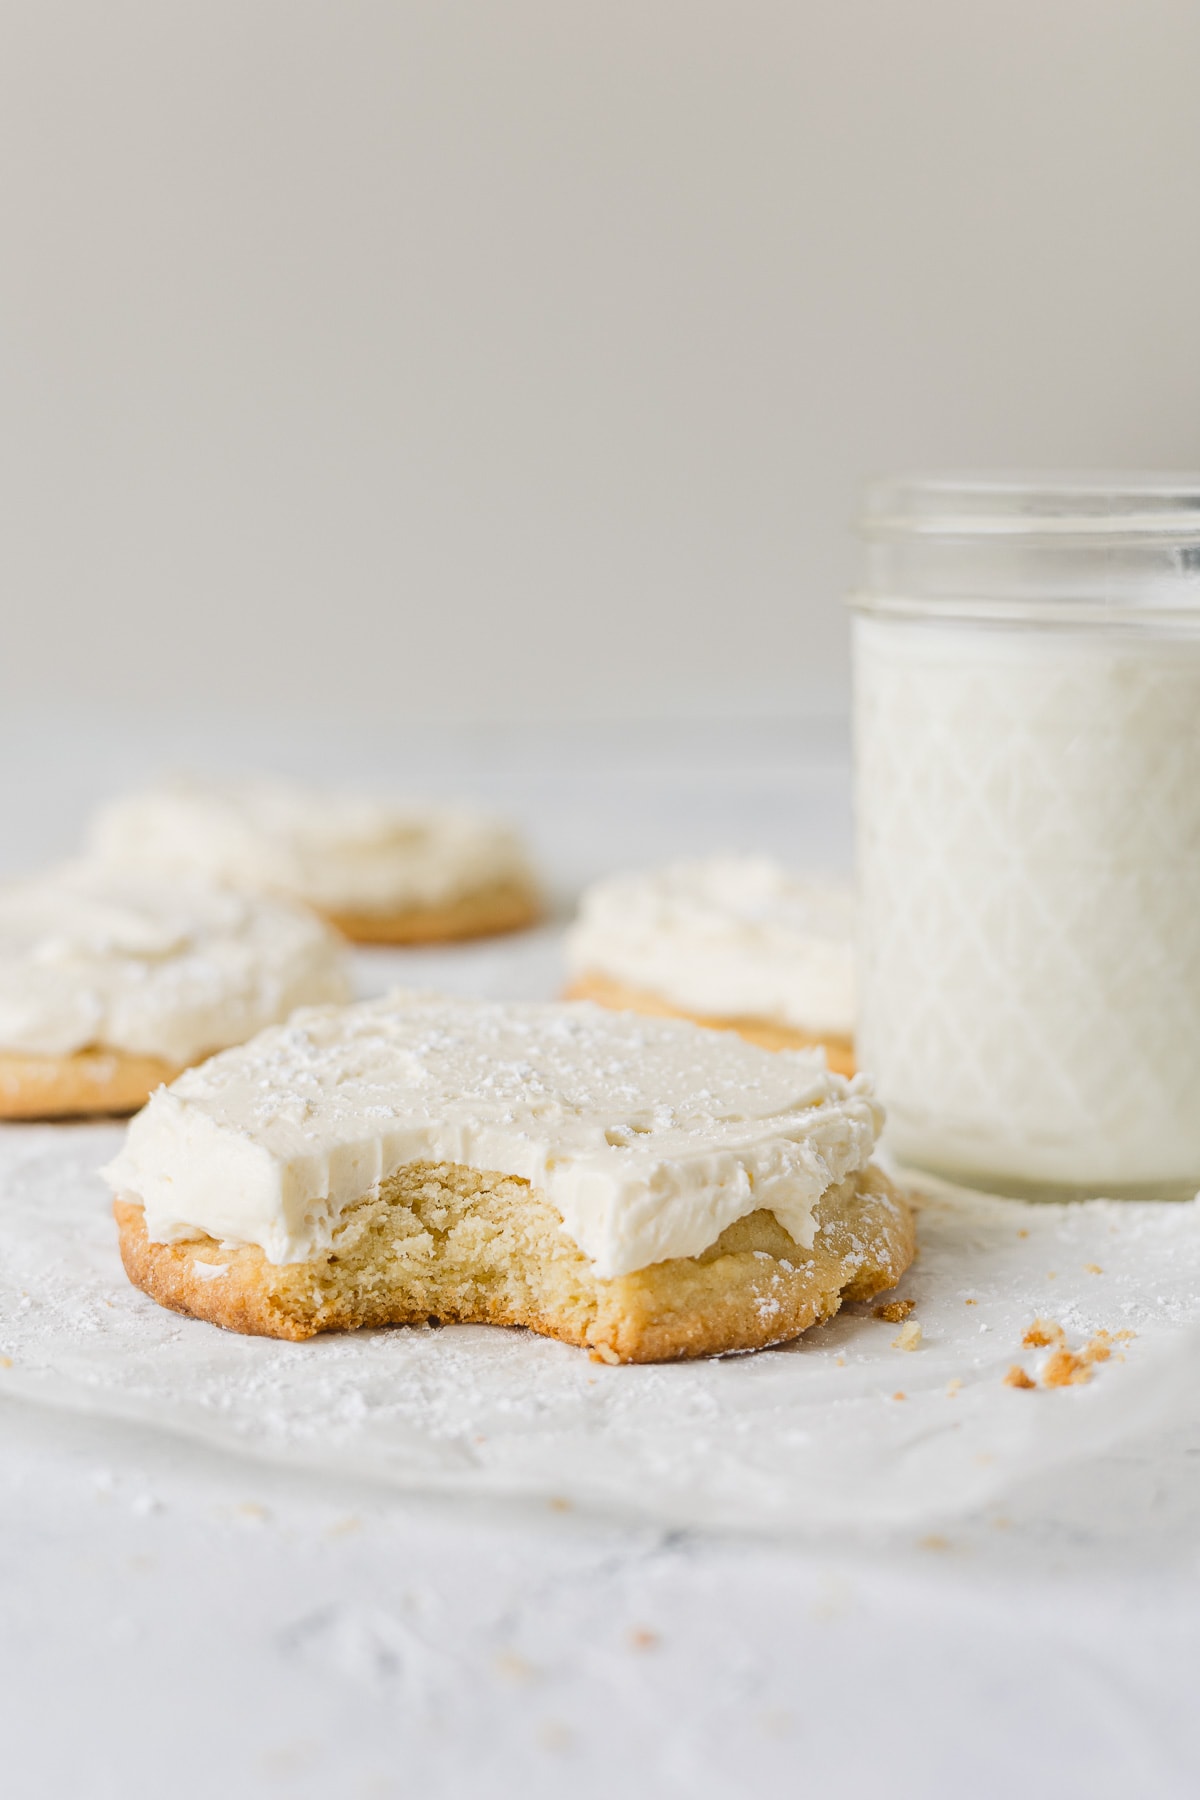 A vanilla frosted sugar cookie with a bite removed and a glass of milk.